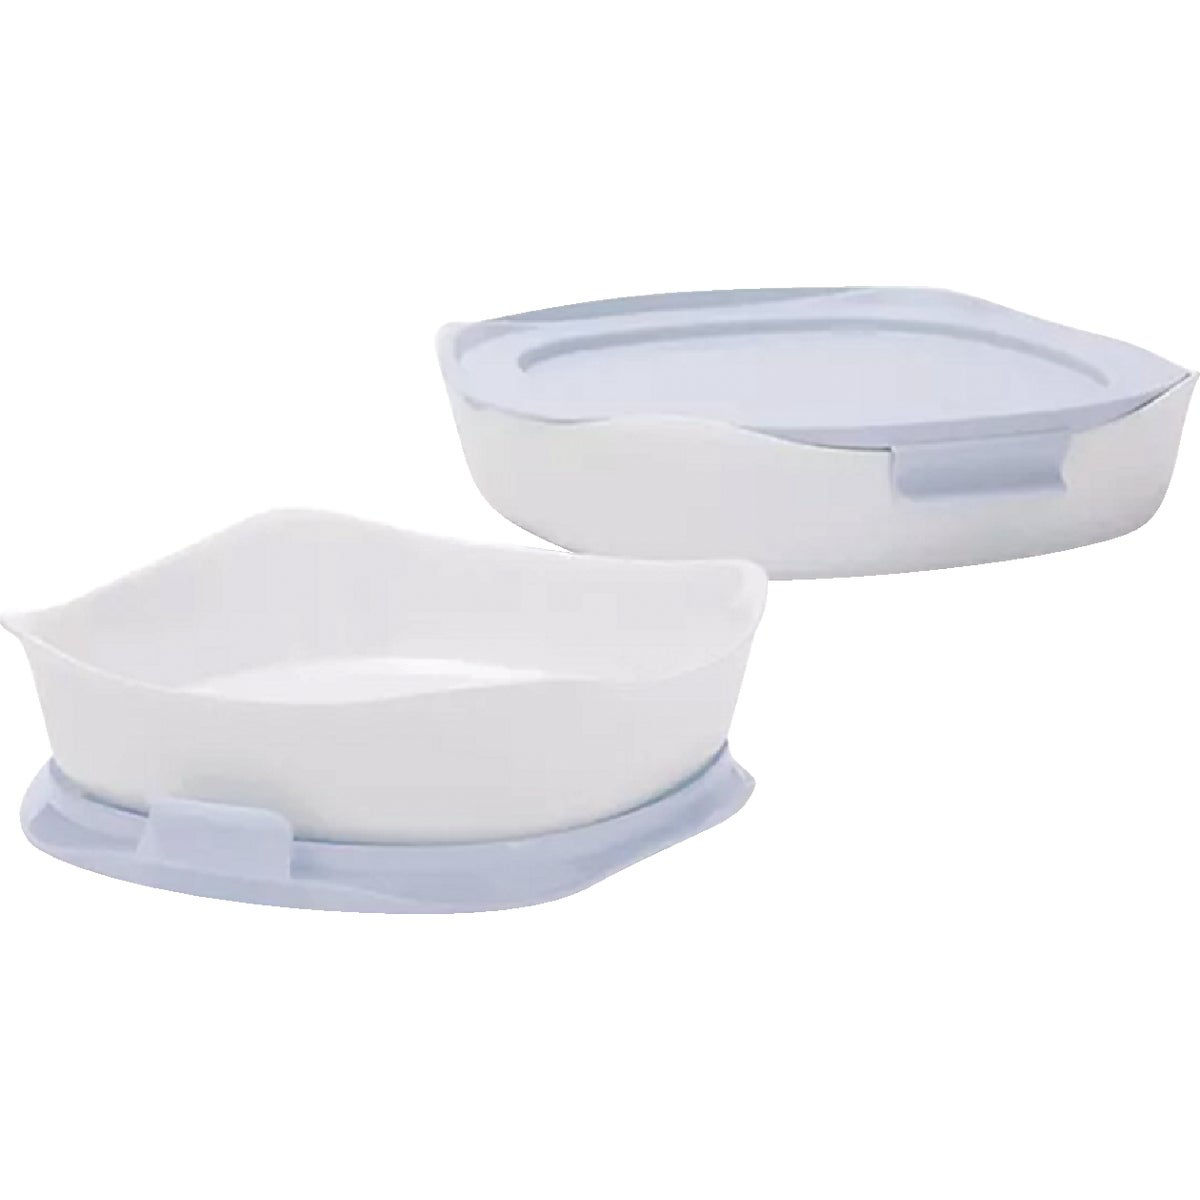  Rubbermaid Glass Baking Dishes for Oven, Casserole Dish  Bakeware, DuraLite 12-Piece Set, White (with Lids): Home & Kitchen